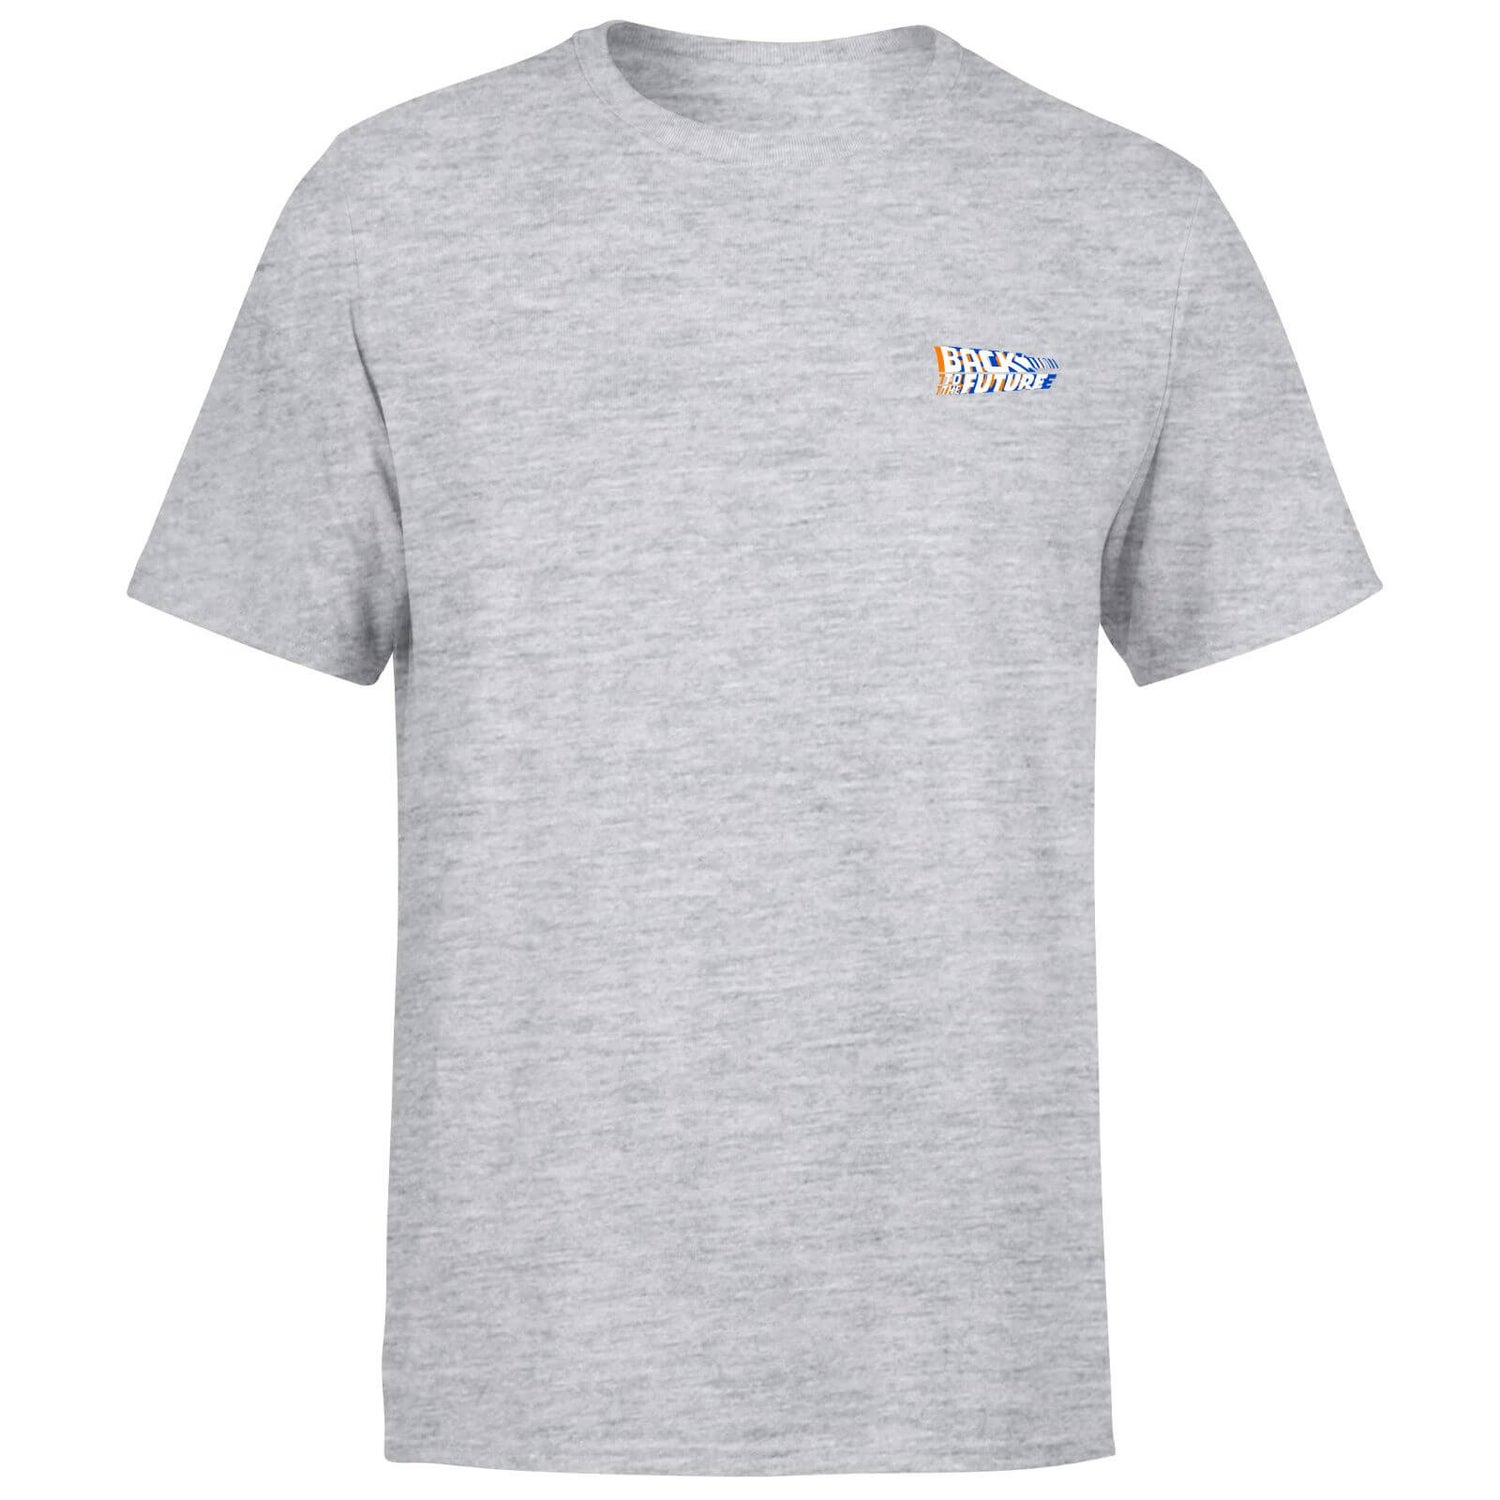 Back To The Future Men's T-Shirt - Grey